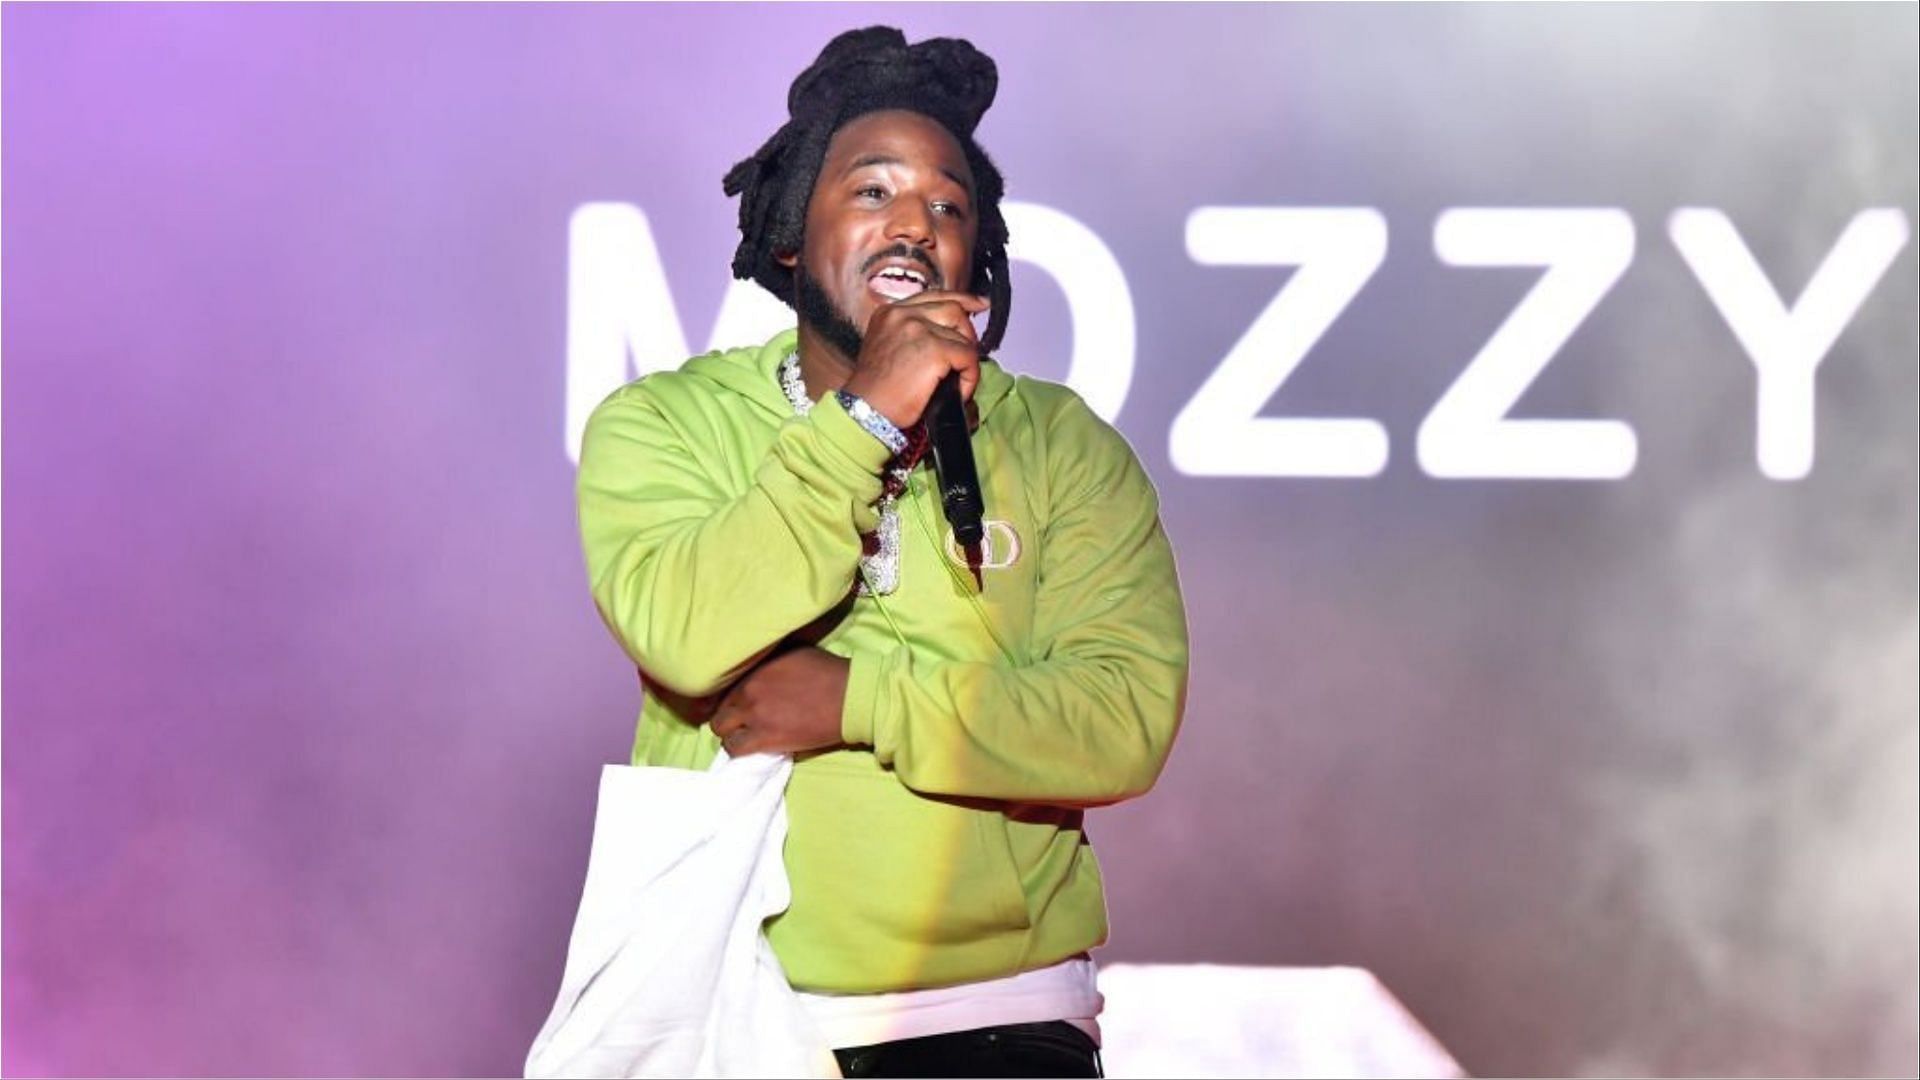 Mozzy has been arrested after a shooting incident (Image via Paras Griffin/Getty Images)